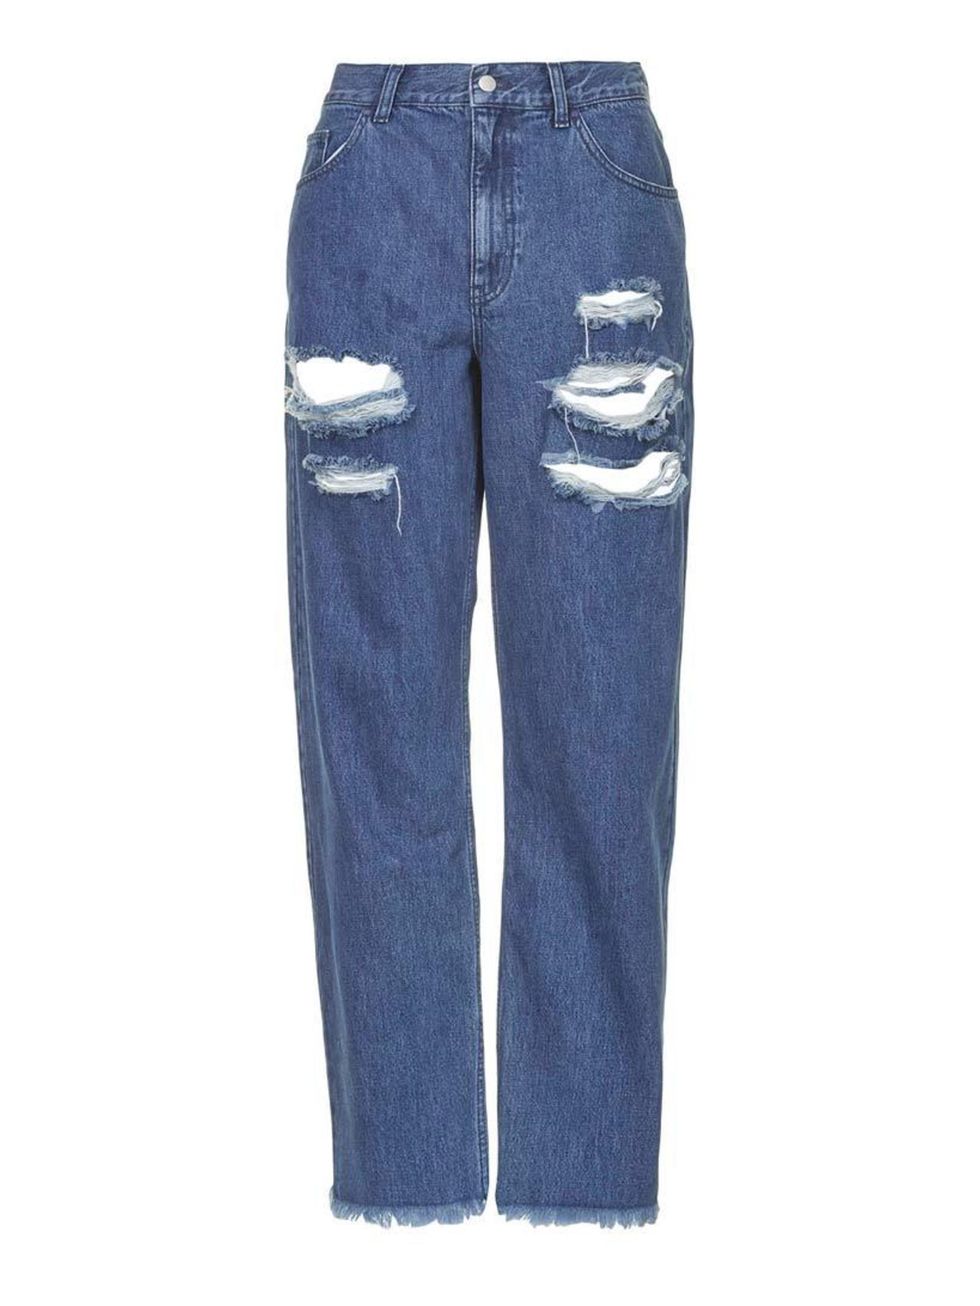 <p>Denim enthusiasts should check out Topshop's latest collaboration, pronto.</p>

<p> </p>

<p><a href="http://www.topshop.com/en/tsuk/product/new-in-this-week-2169932/new-in-this-week-493/ripped-boyfriend-jeans-by-marquesalmeida-x-topshop-3393502?bi=1&p